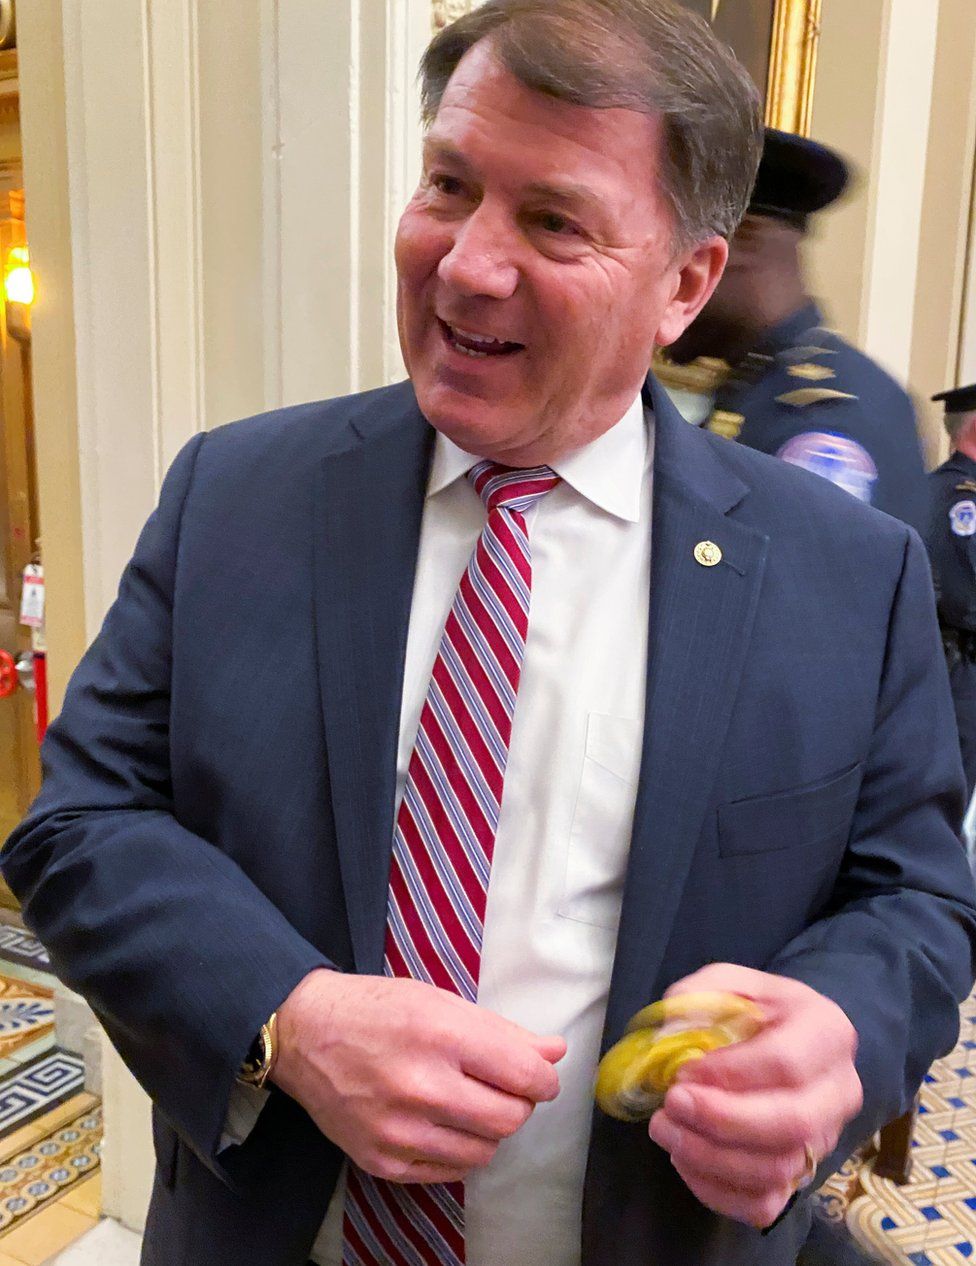 U.S. Senator Mike Rounds (R-SD) plays with a fidget spinner